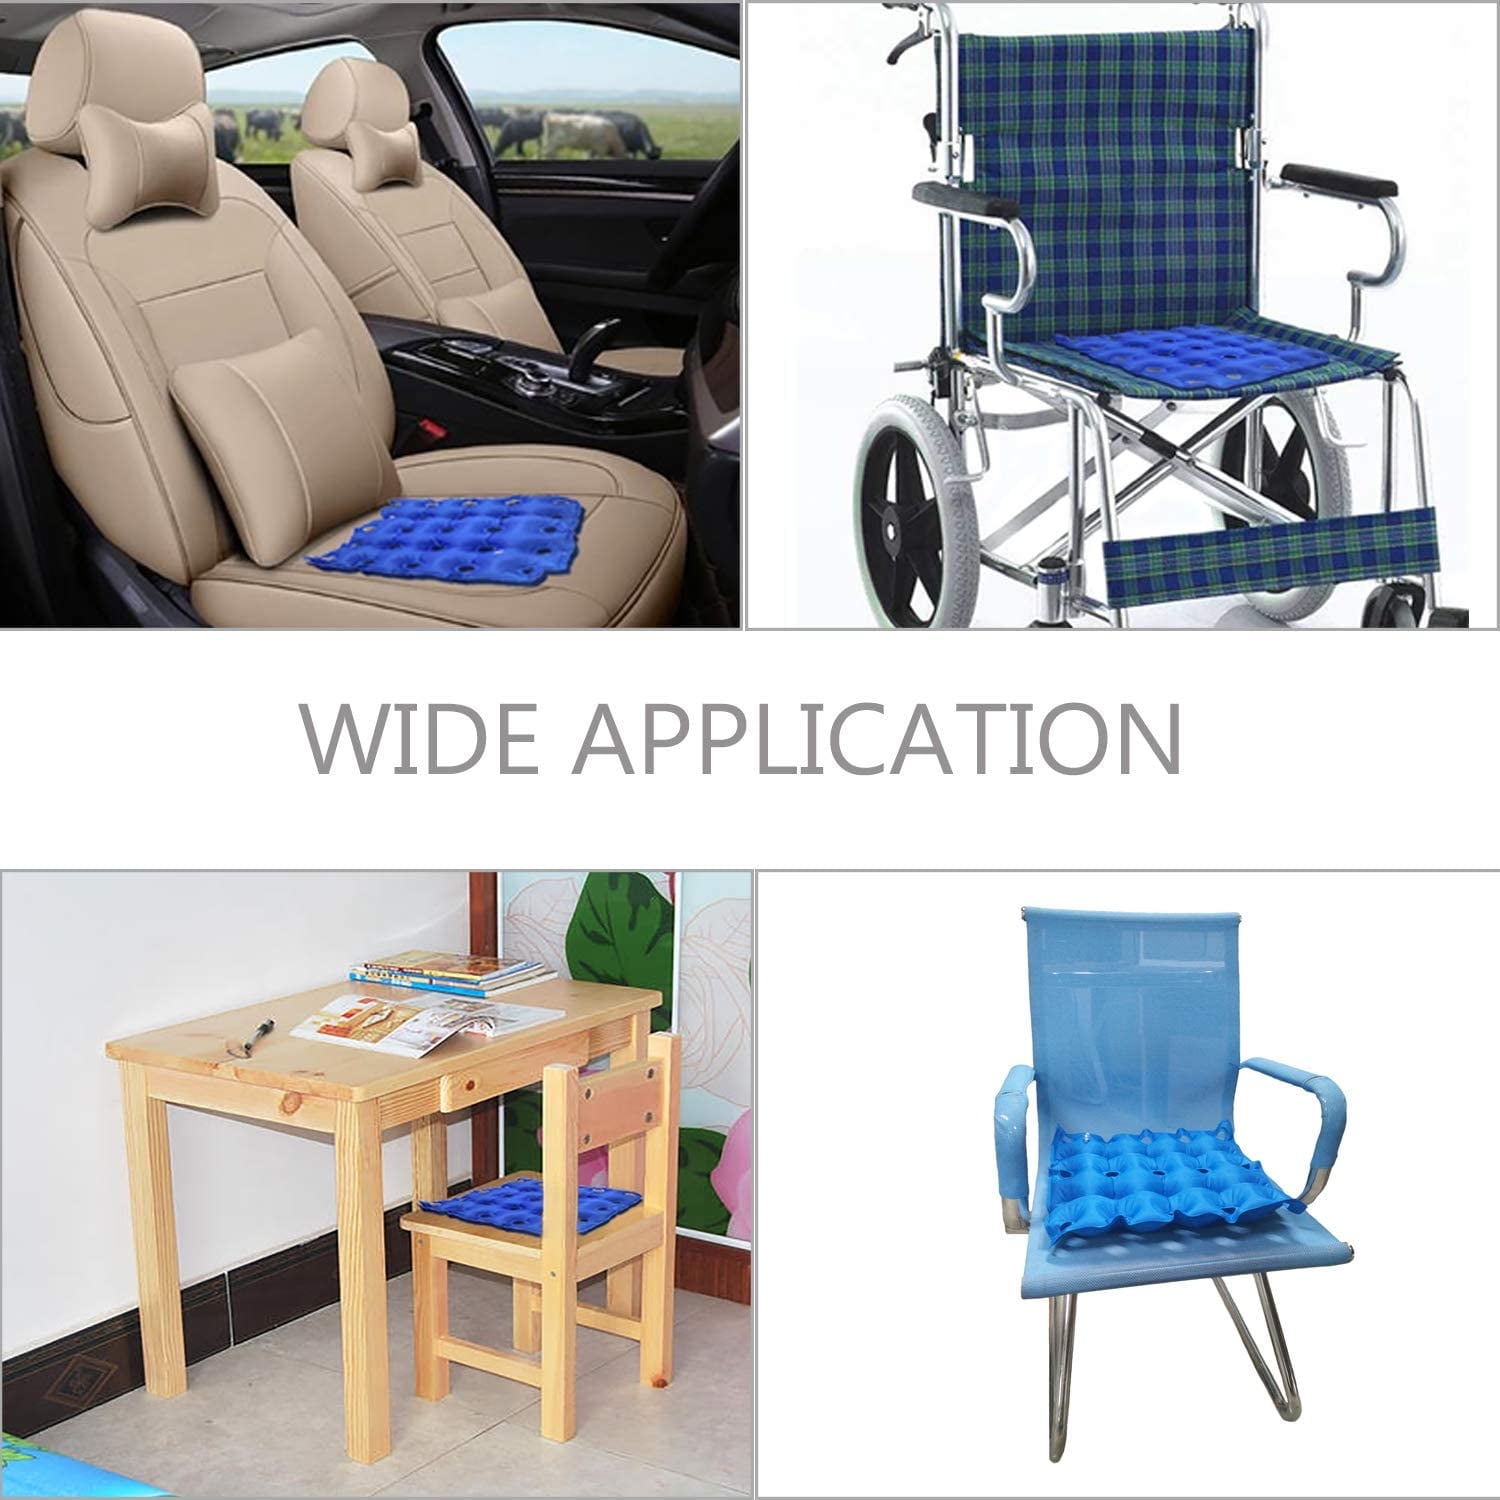 airweave Seat Cushion  Comfort & Support For Your Seat